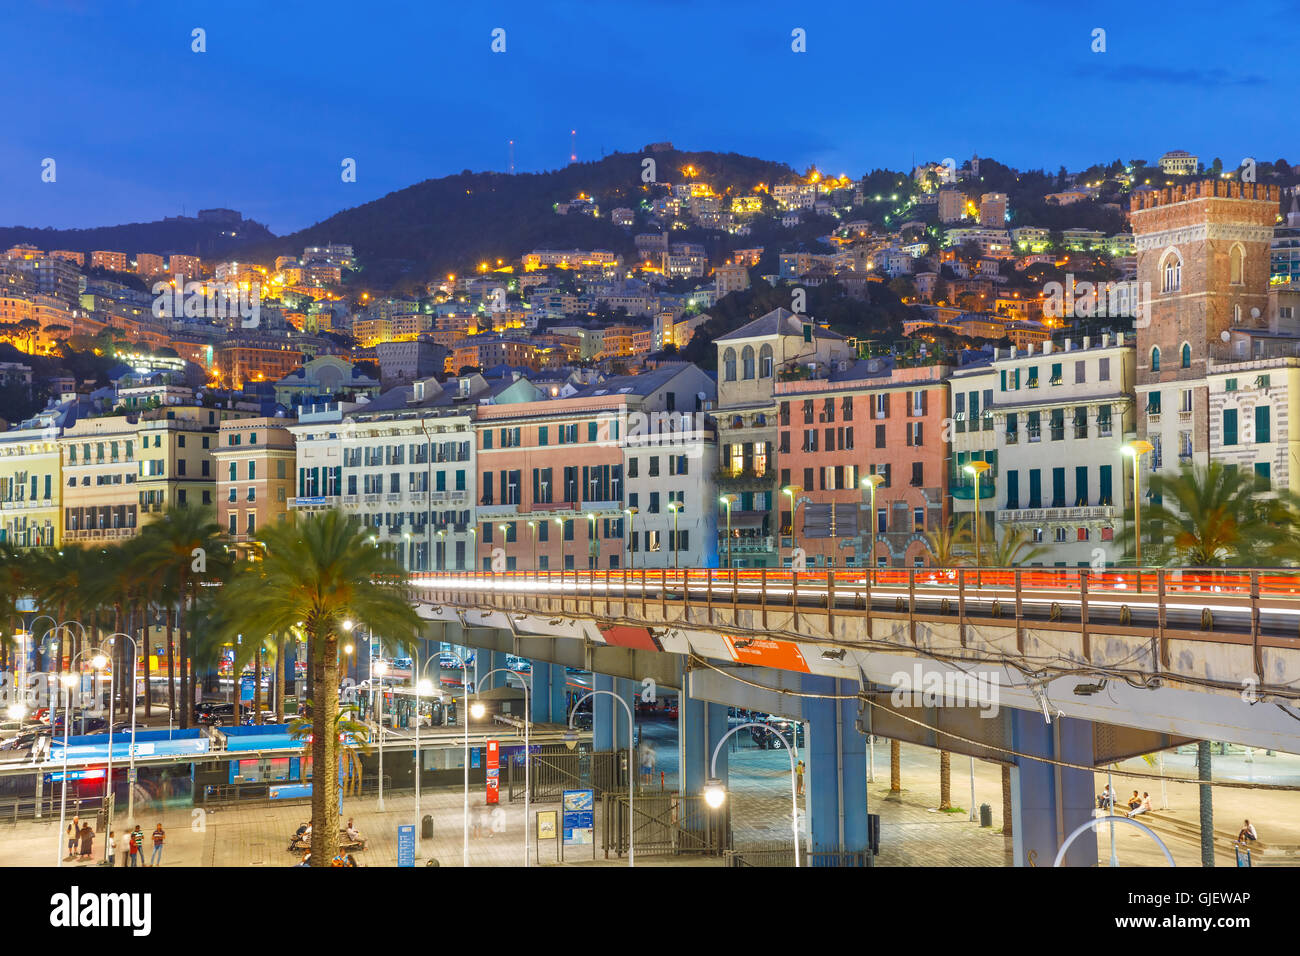 Old town and highway of Genoa at night, Italy. Stock Photo